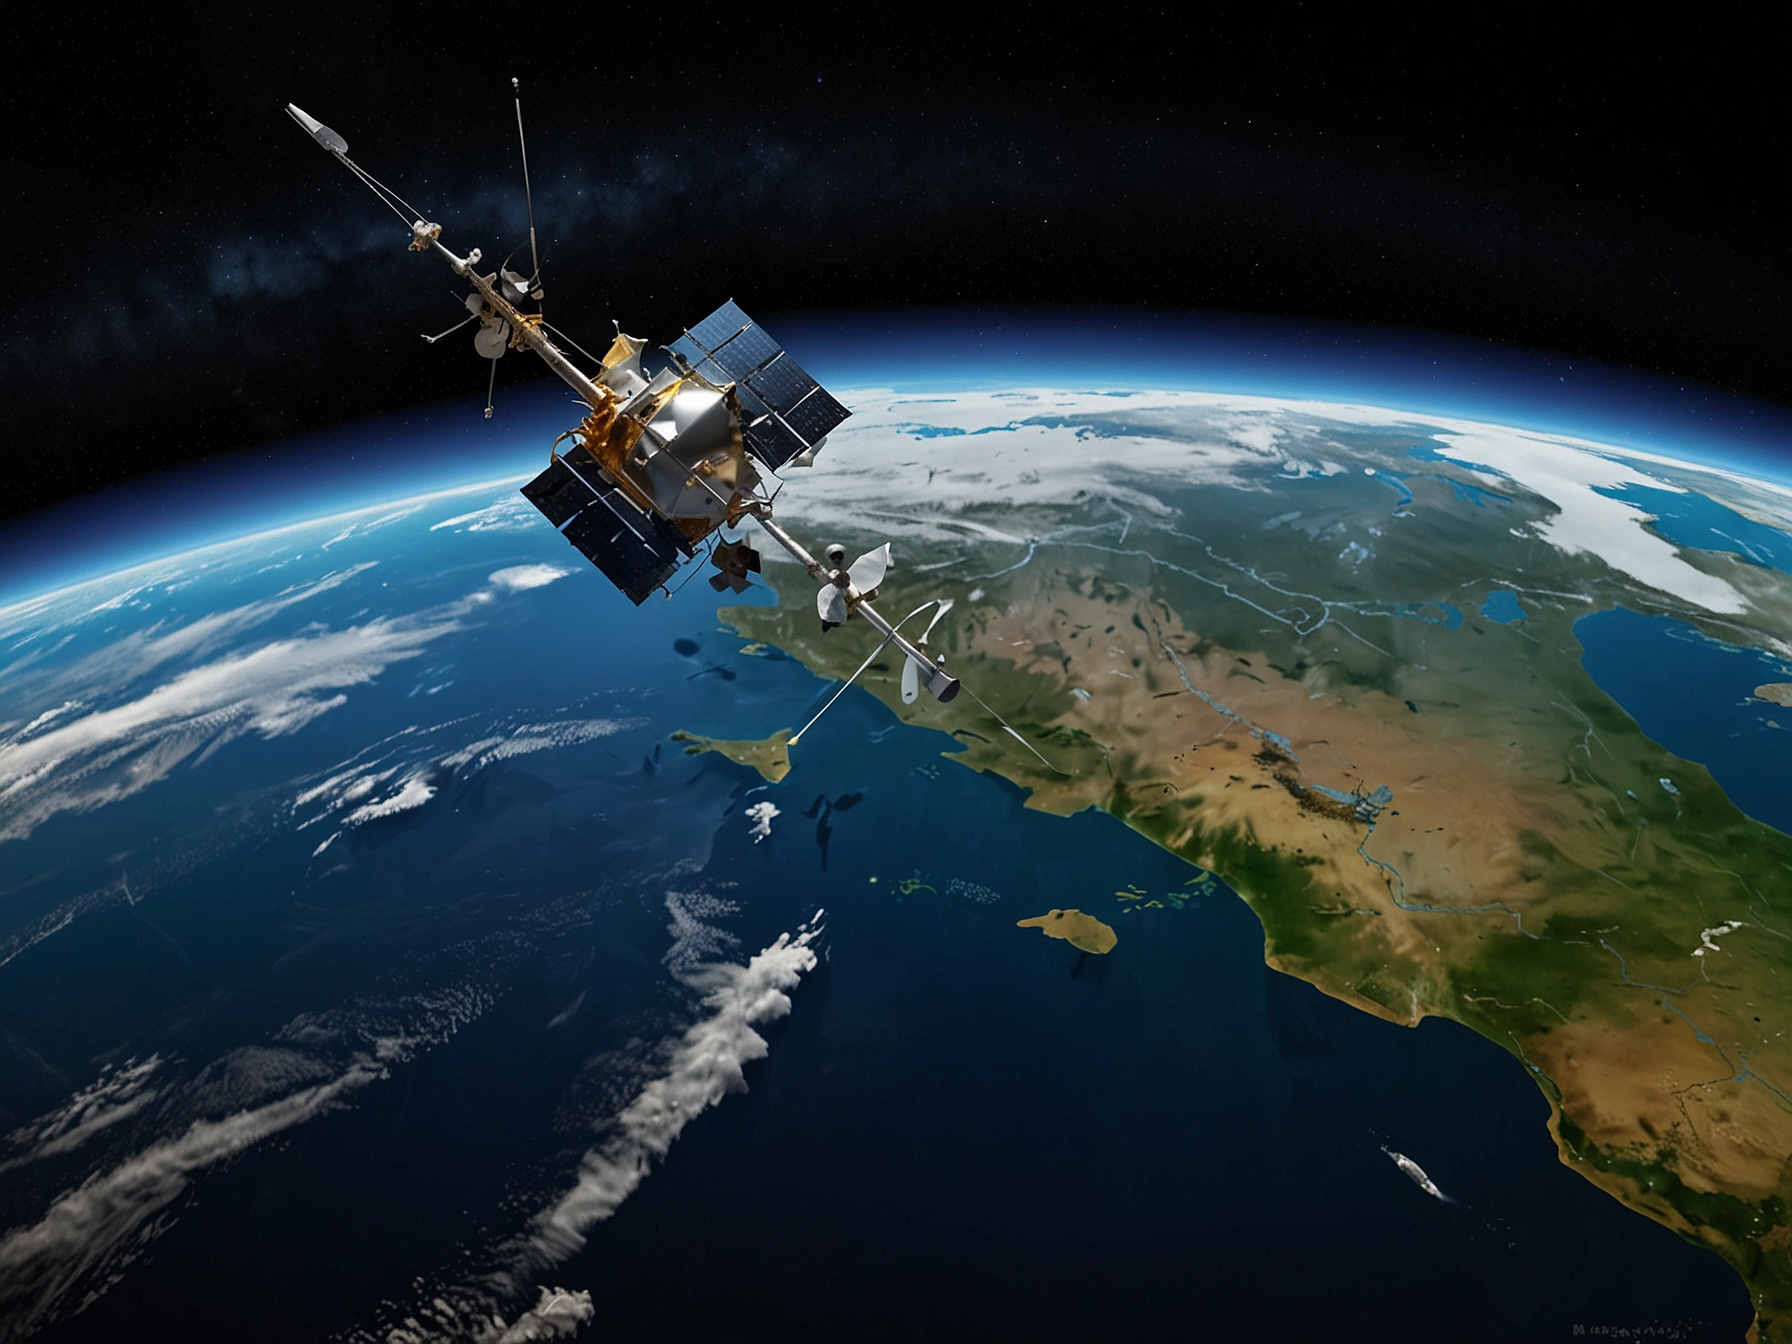 Illustration of NASA satellite monitoring Earth's climate, highlighting the agency's role in Earth observation and climate data collection for resilience strategies.